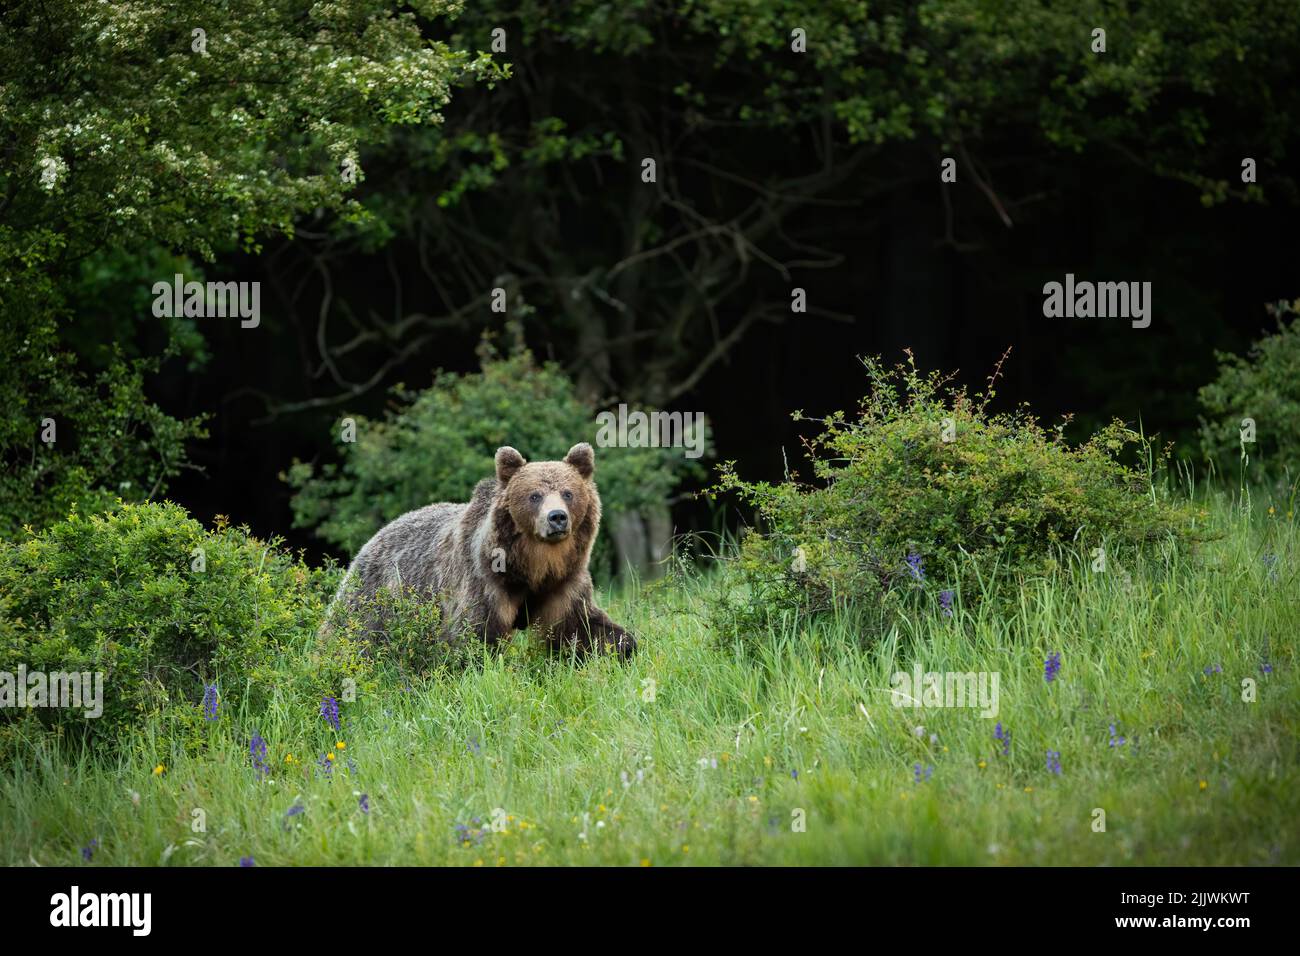 Brown bear walking on grass in forest in summertime Stock Photo